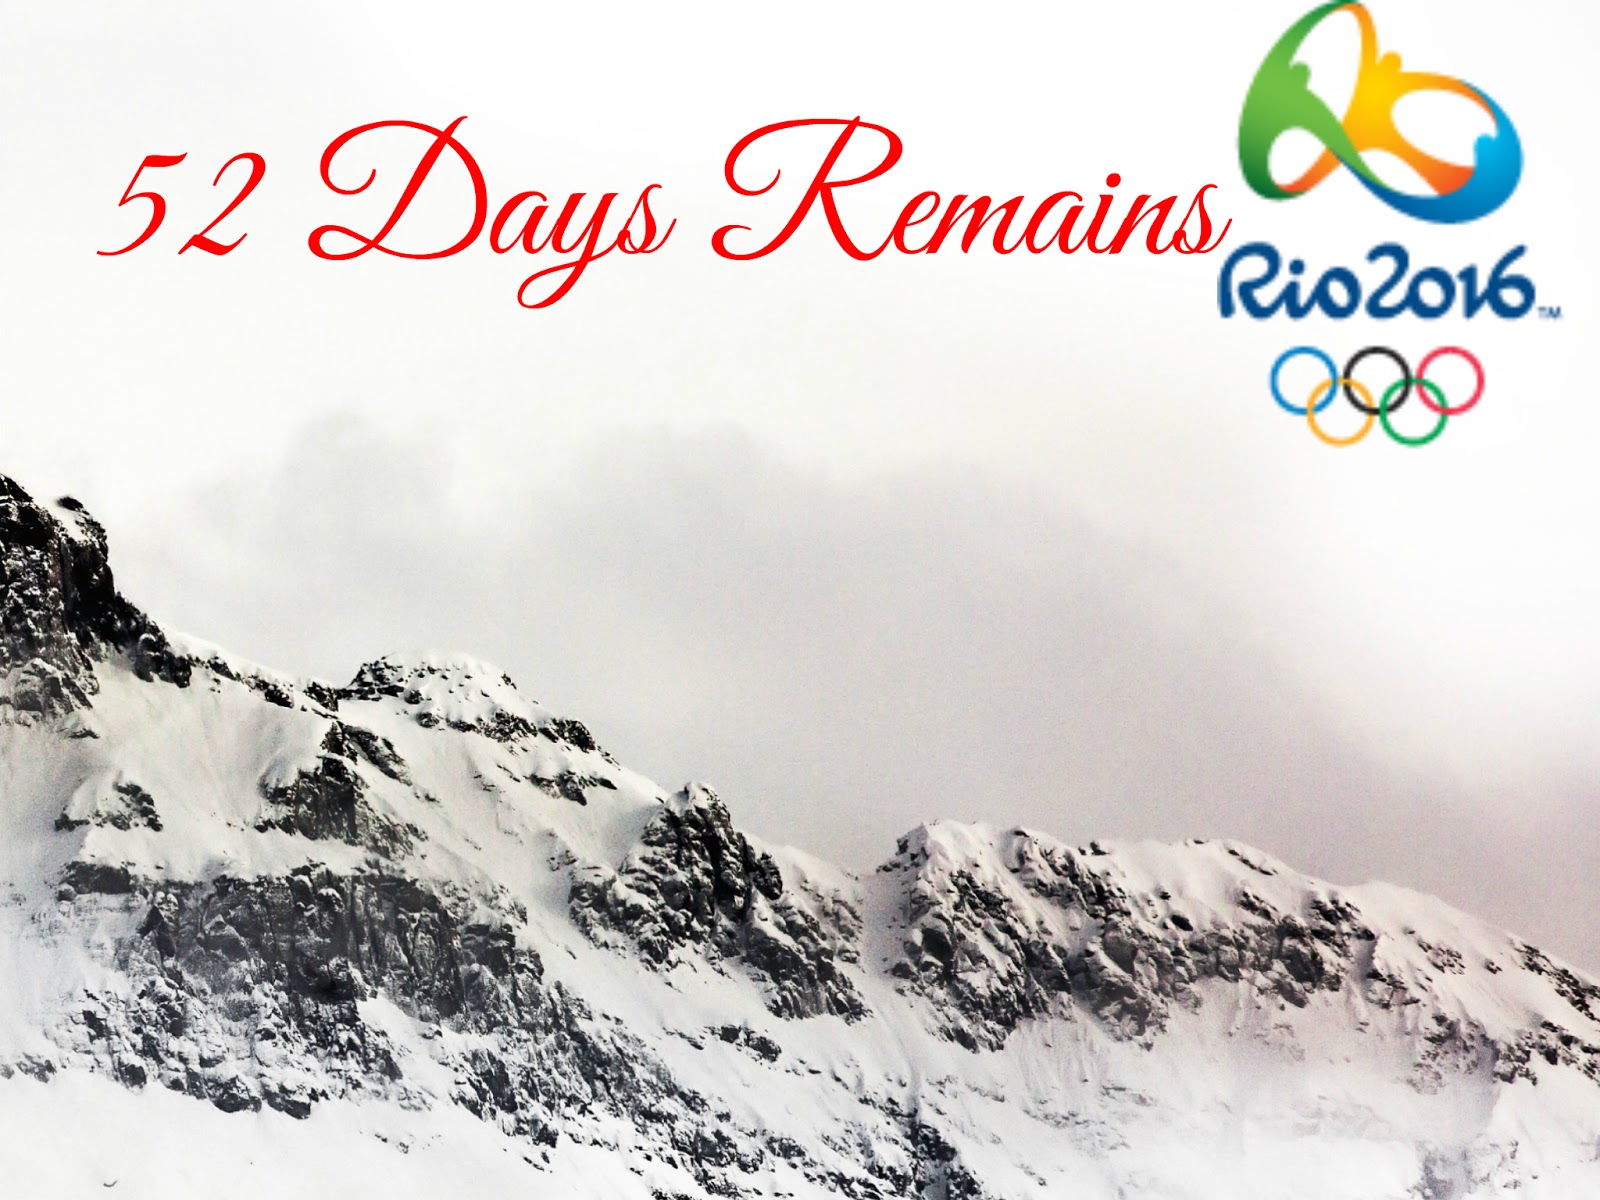 Count Down Timer Wallpaper For Rio Olympic